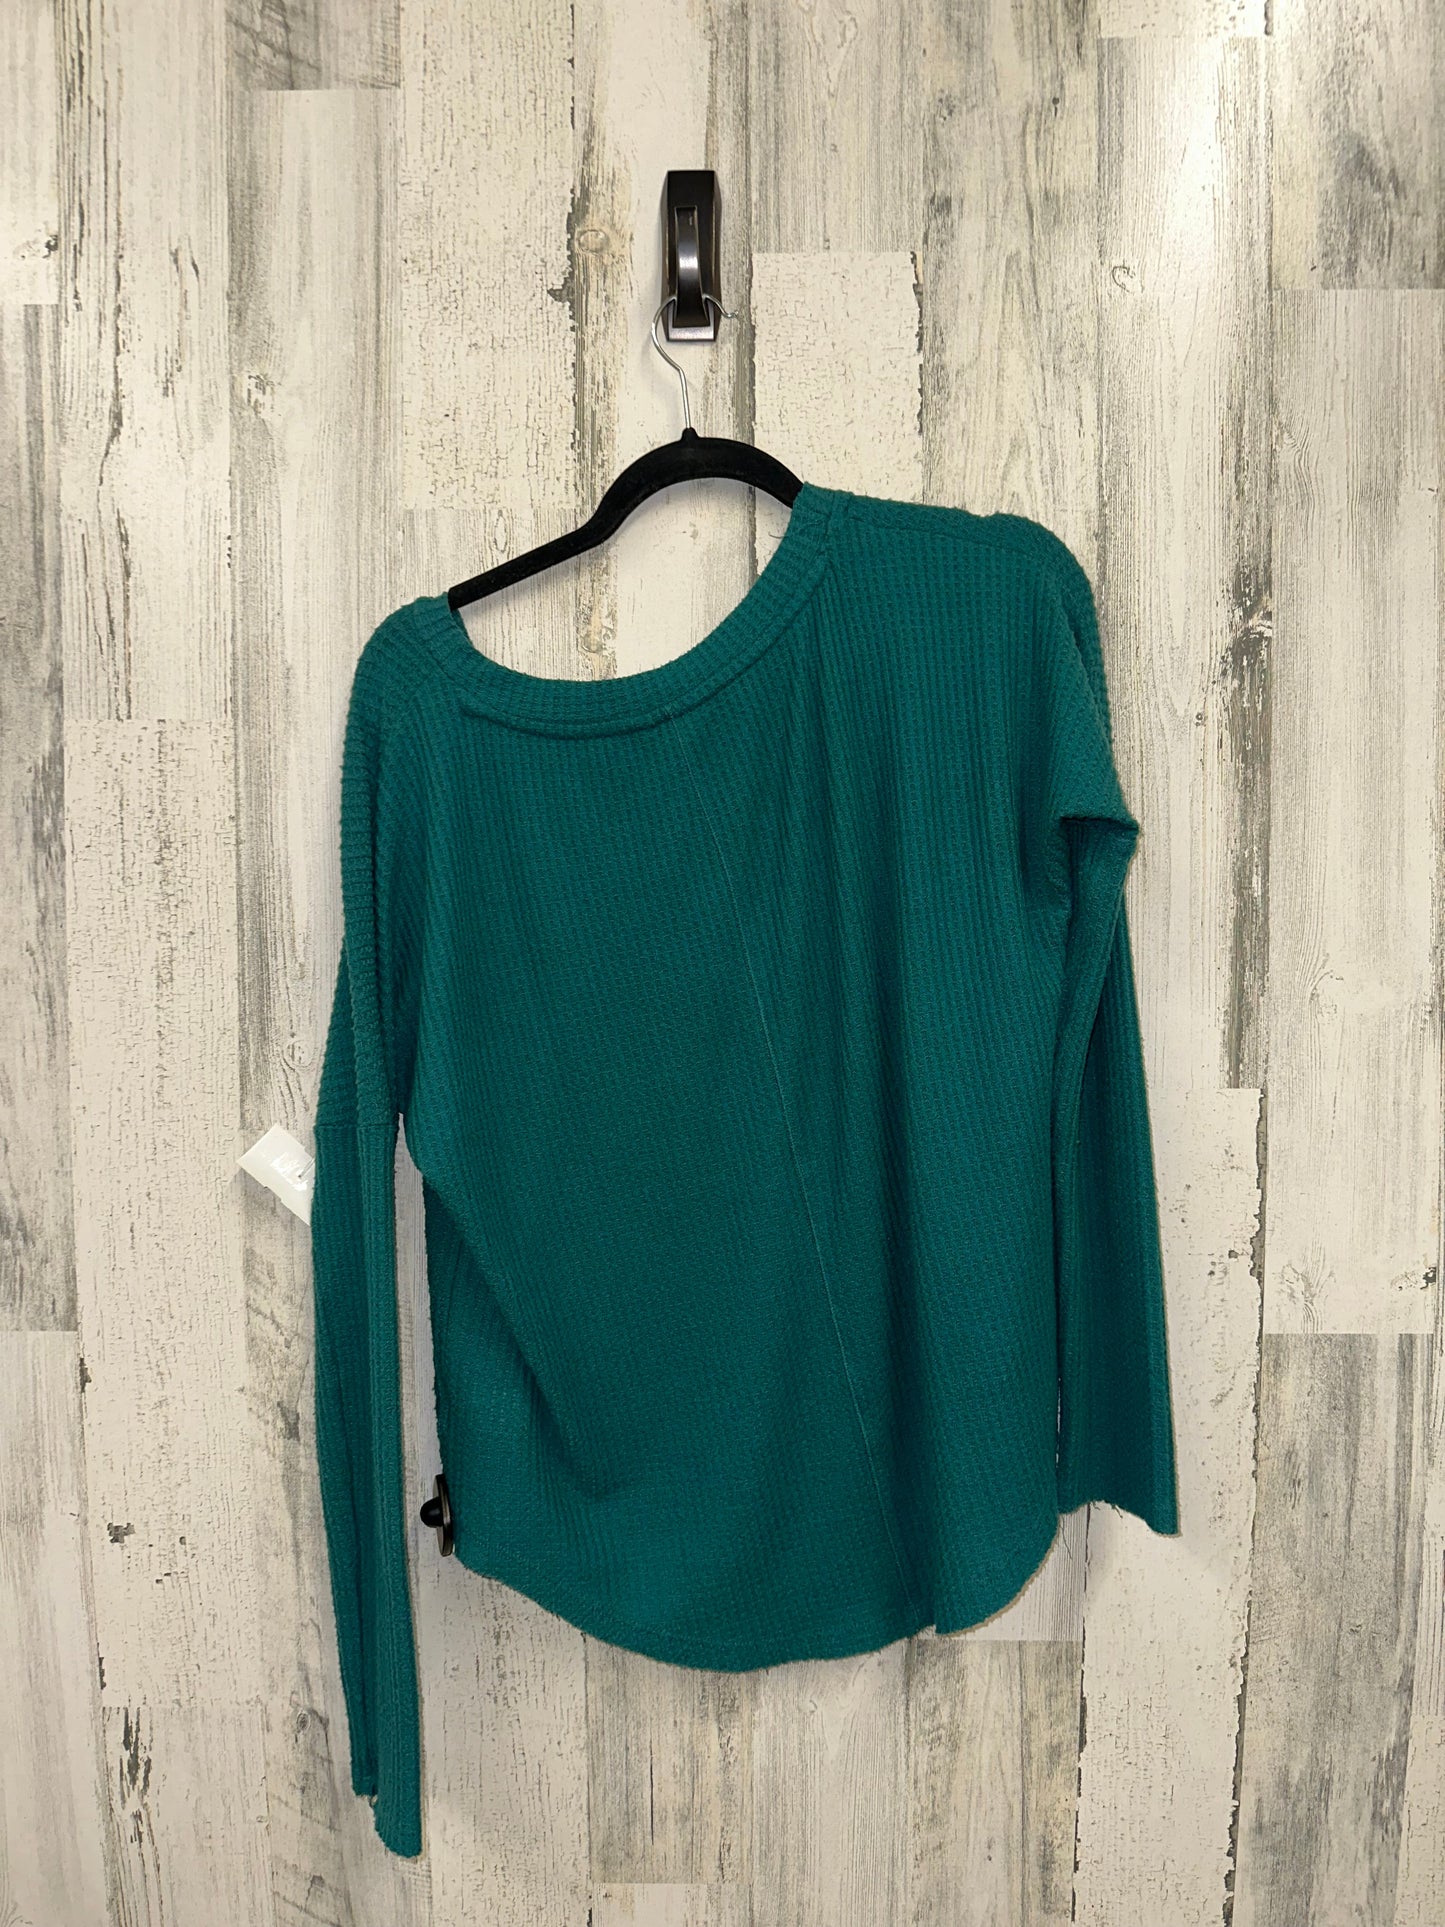 Top Long Sleeve By Aeropostale  Size: M